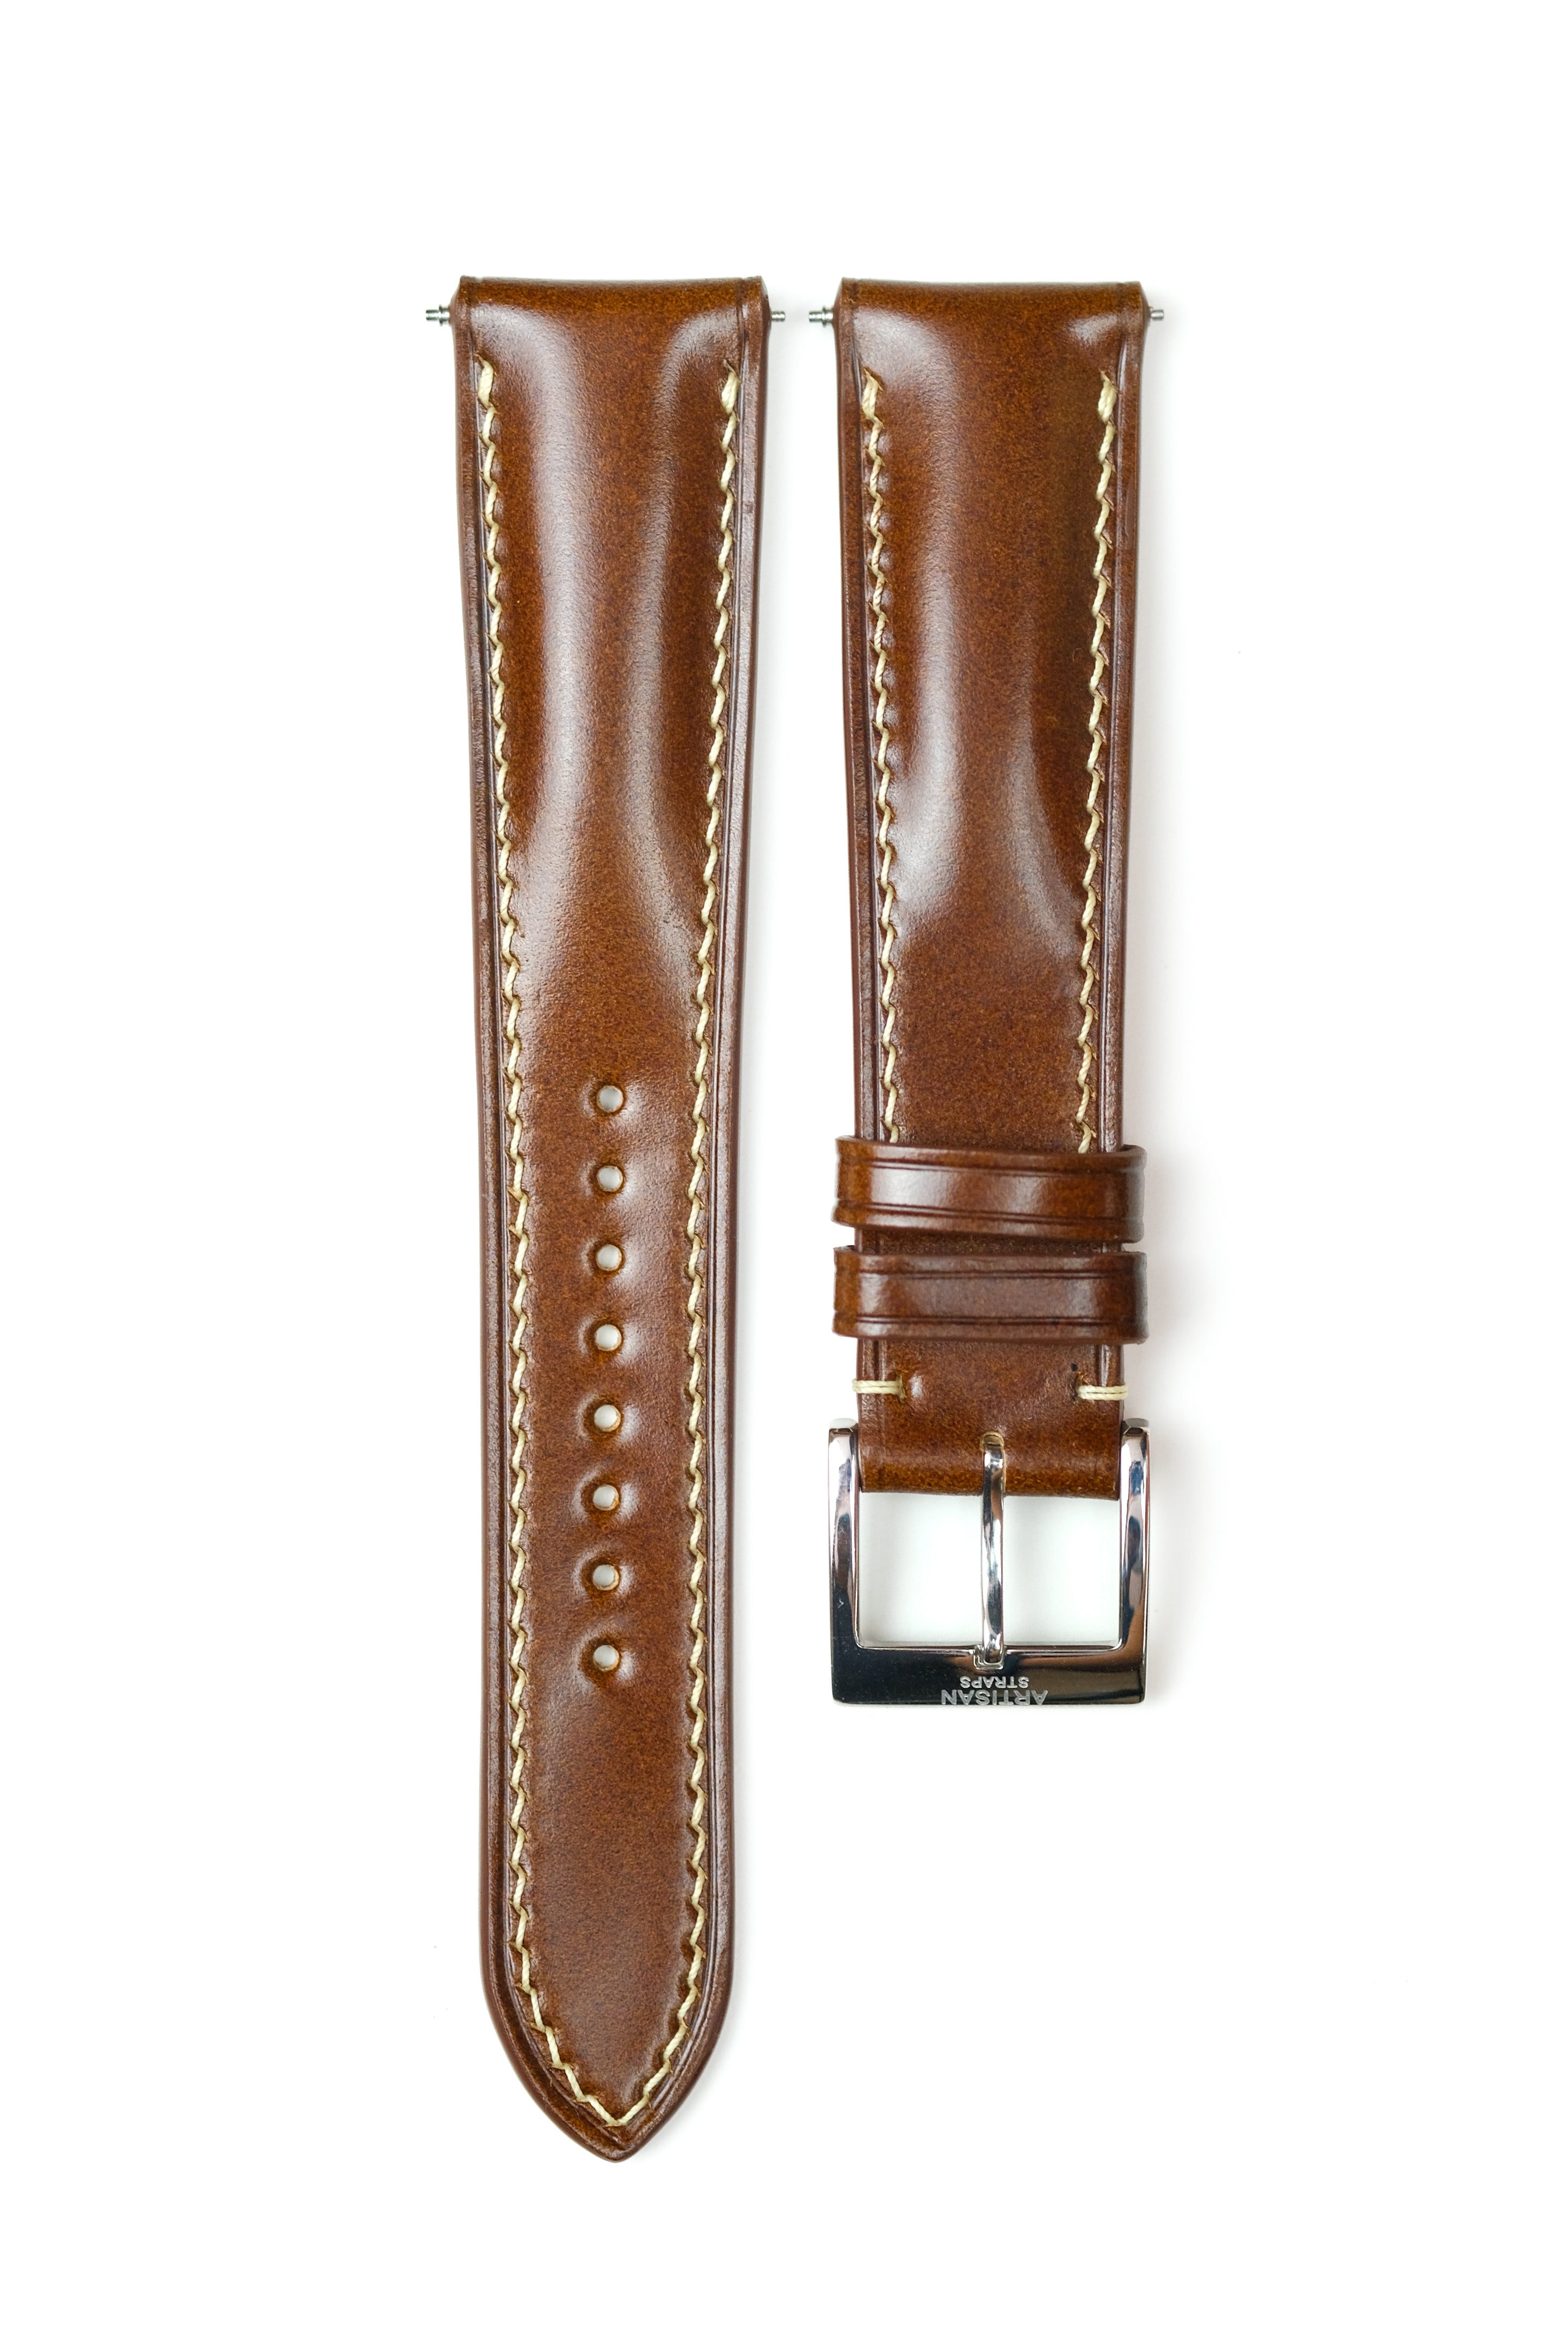 Cognac Shell Cordovan (Padded) Leather Strap